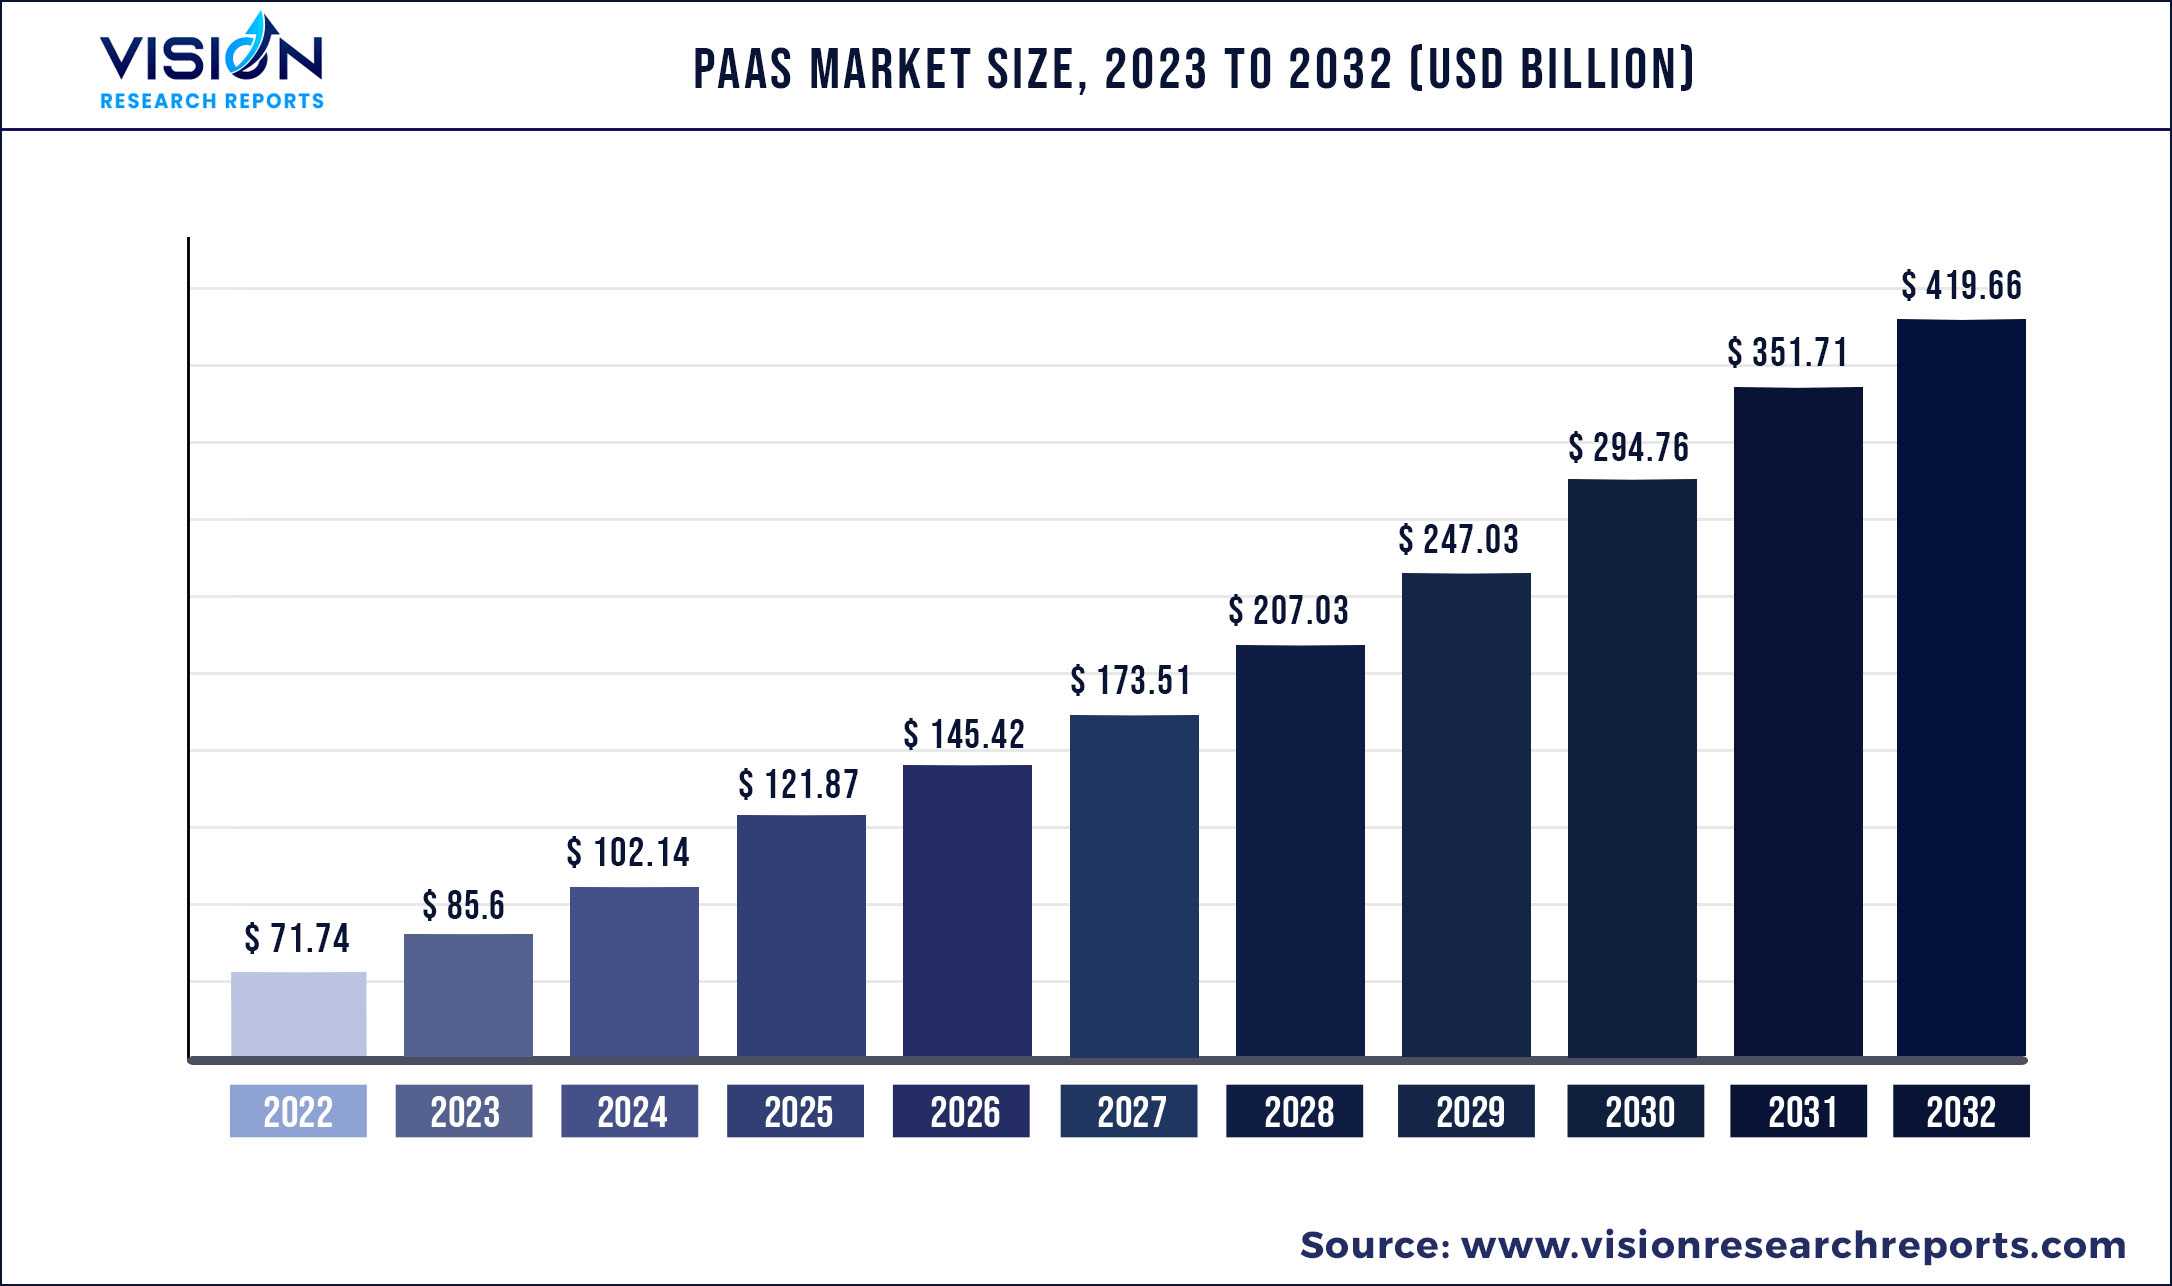 PaaS Market Size 2023 to 2032